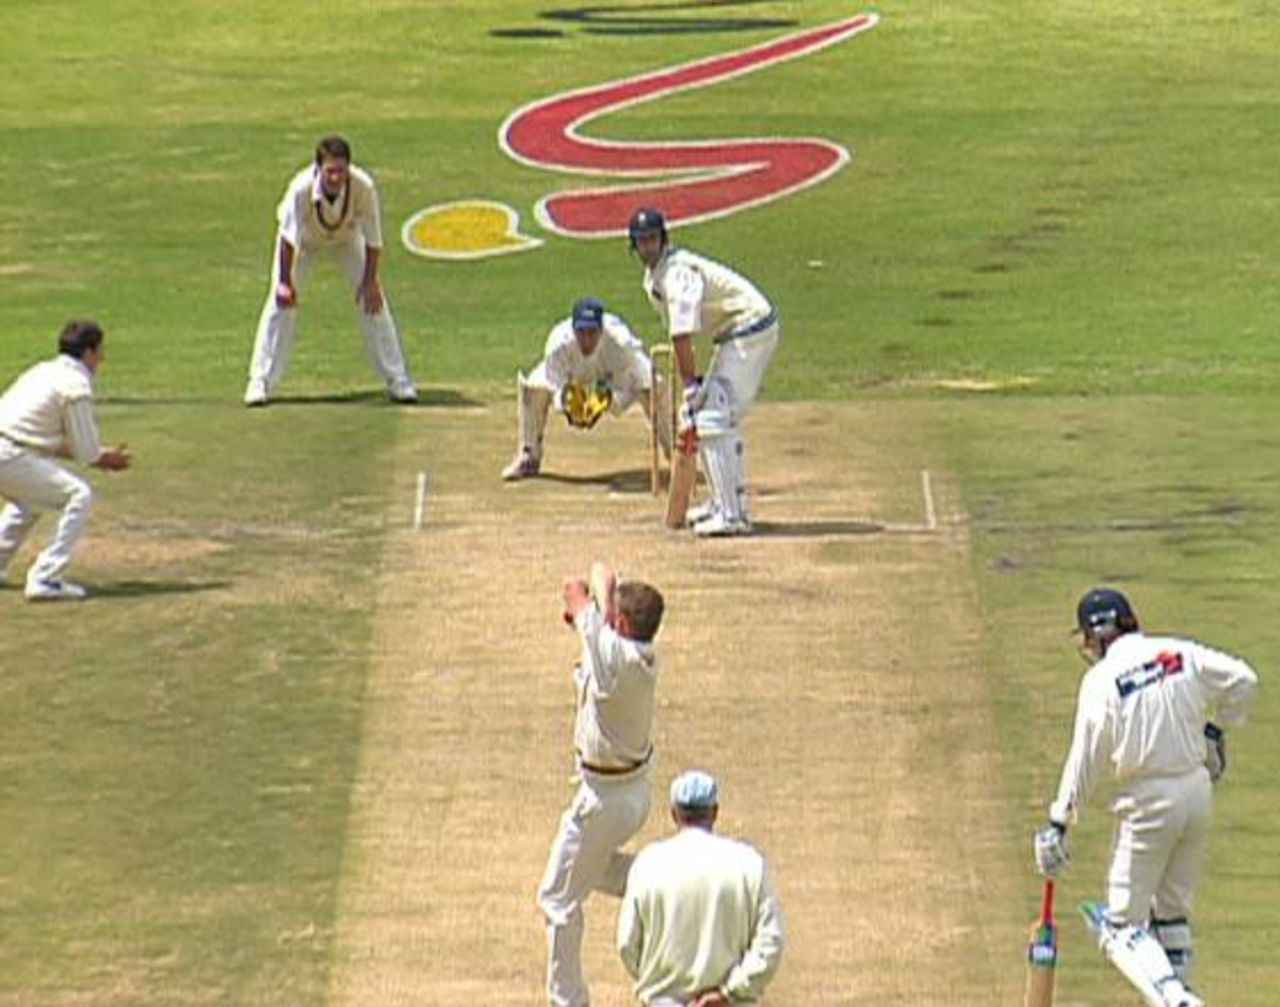 Clive Eksteen bowls to John Commins during the SuperSport Series match between Gauteng and Western Province. Nic Pothas is the 'keeper, with Stefan Jacobs and Ken Rutherford the close-in fielders. The non-striker is Eric Simons.